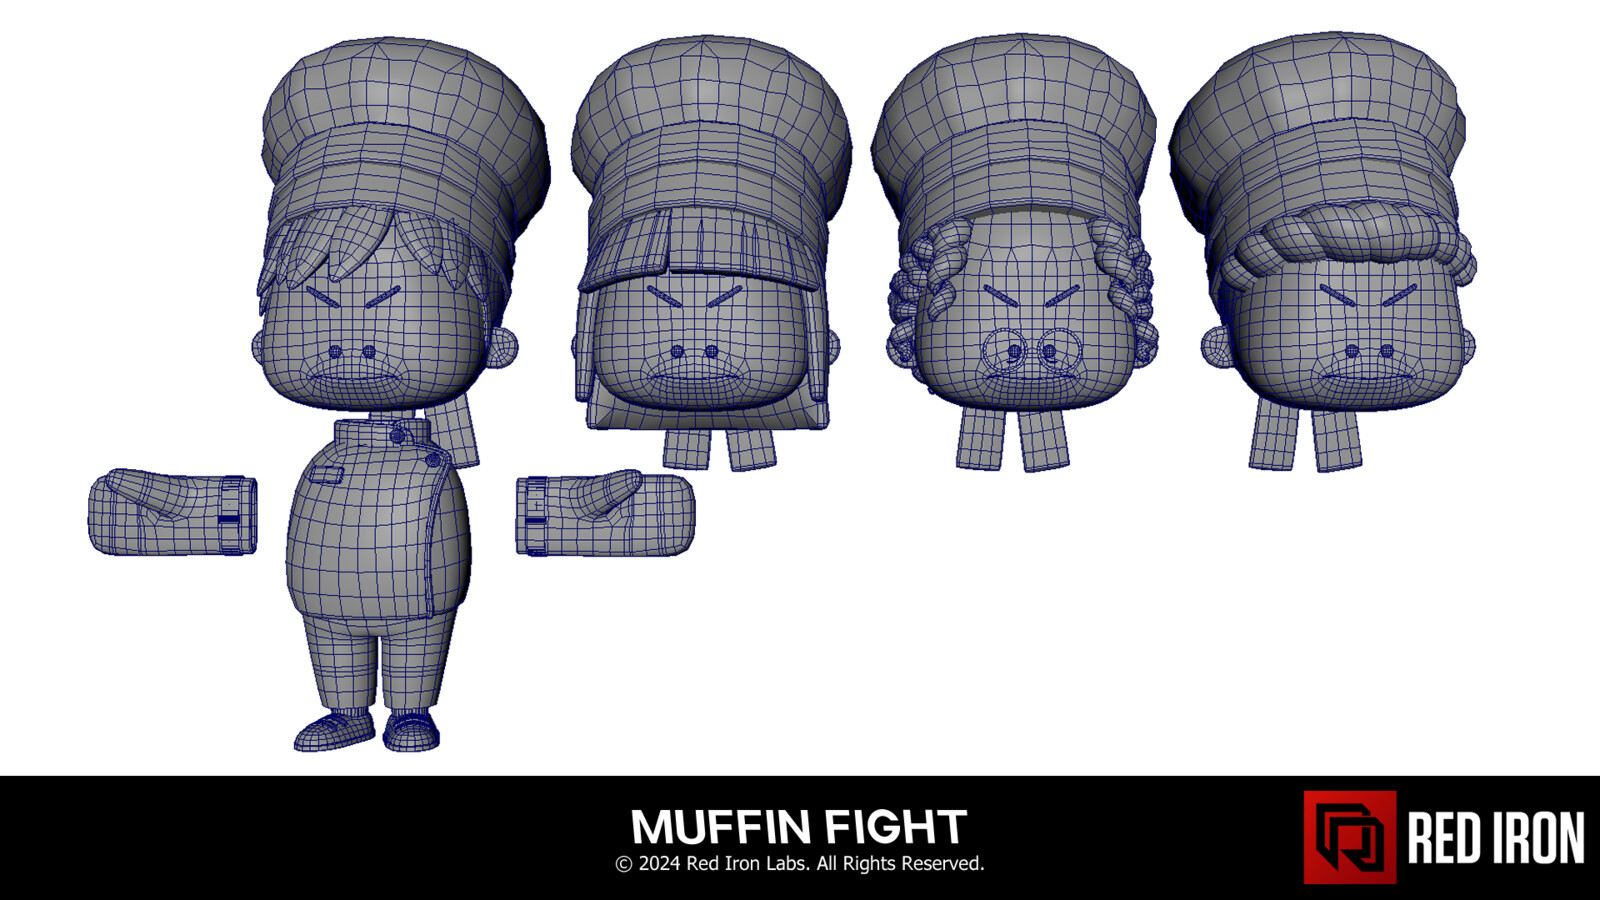 Here are their wireframes. They're built to be modular for future customization, but the hair and textures are the real differences for now.